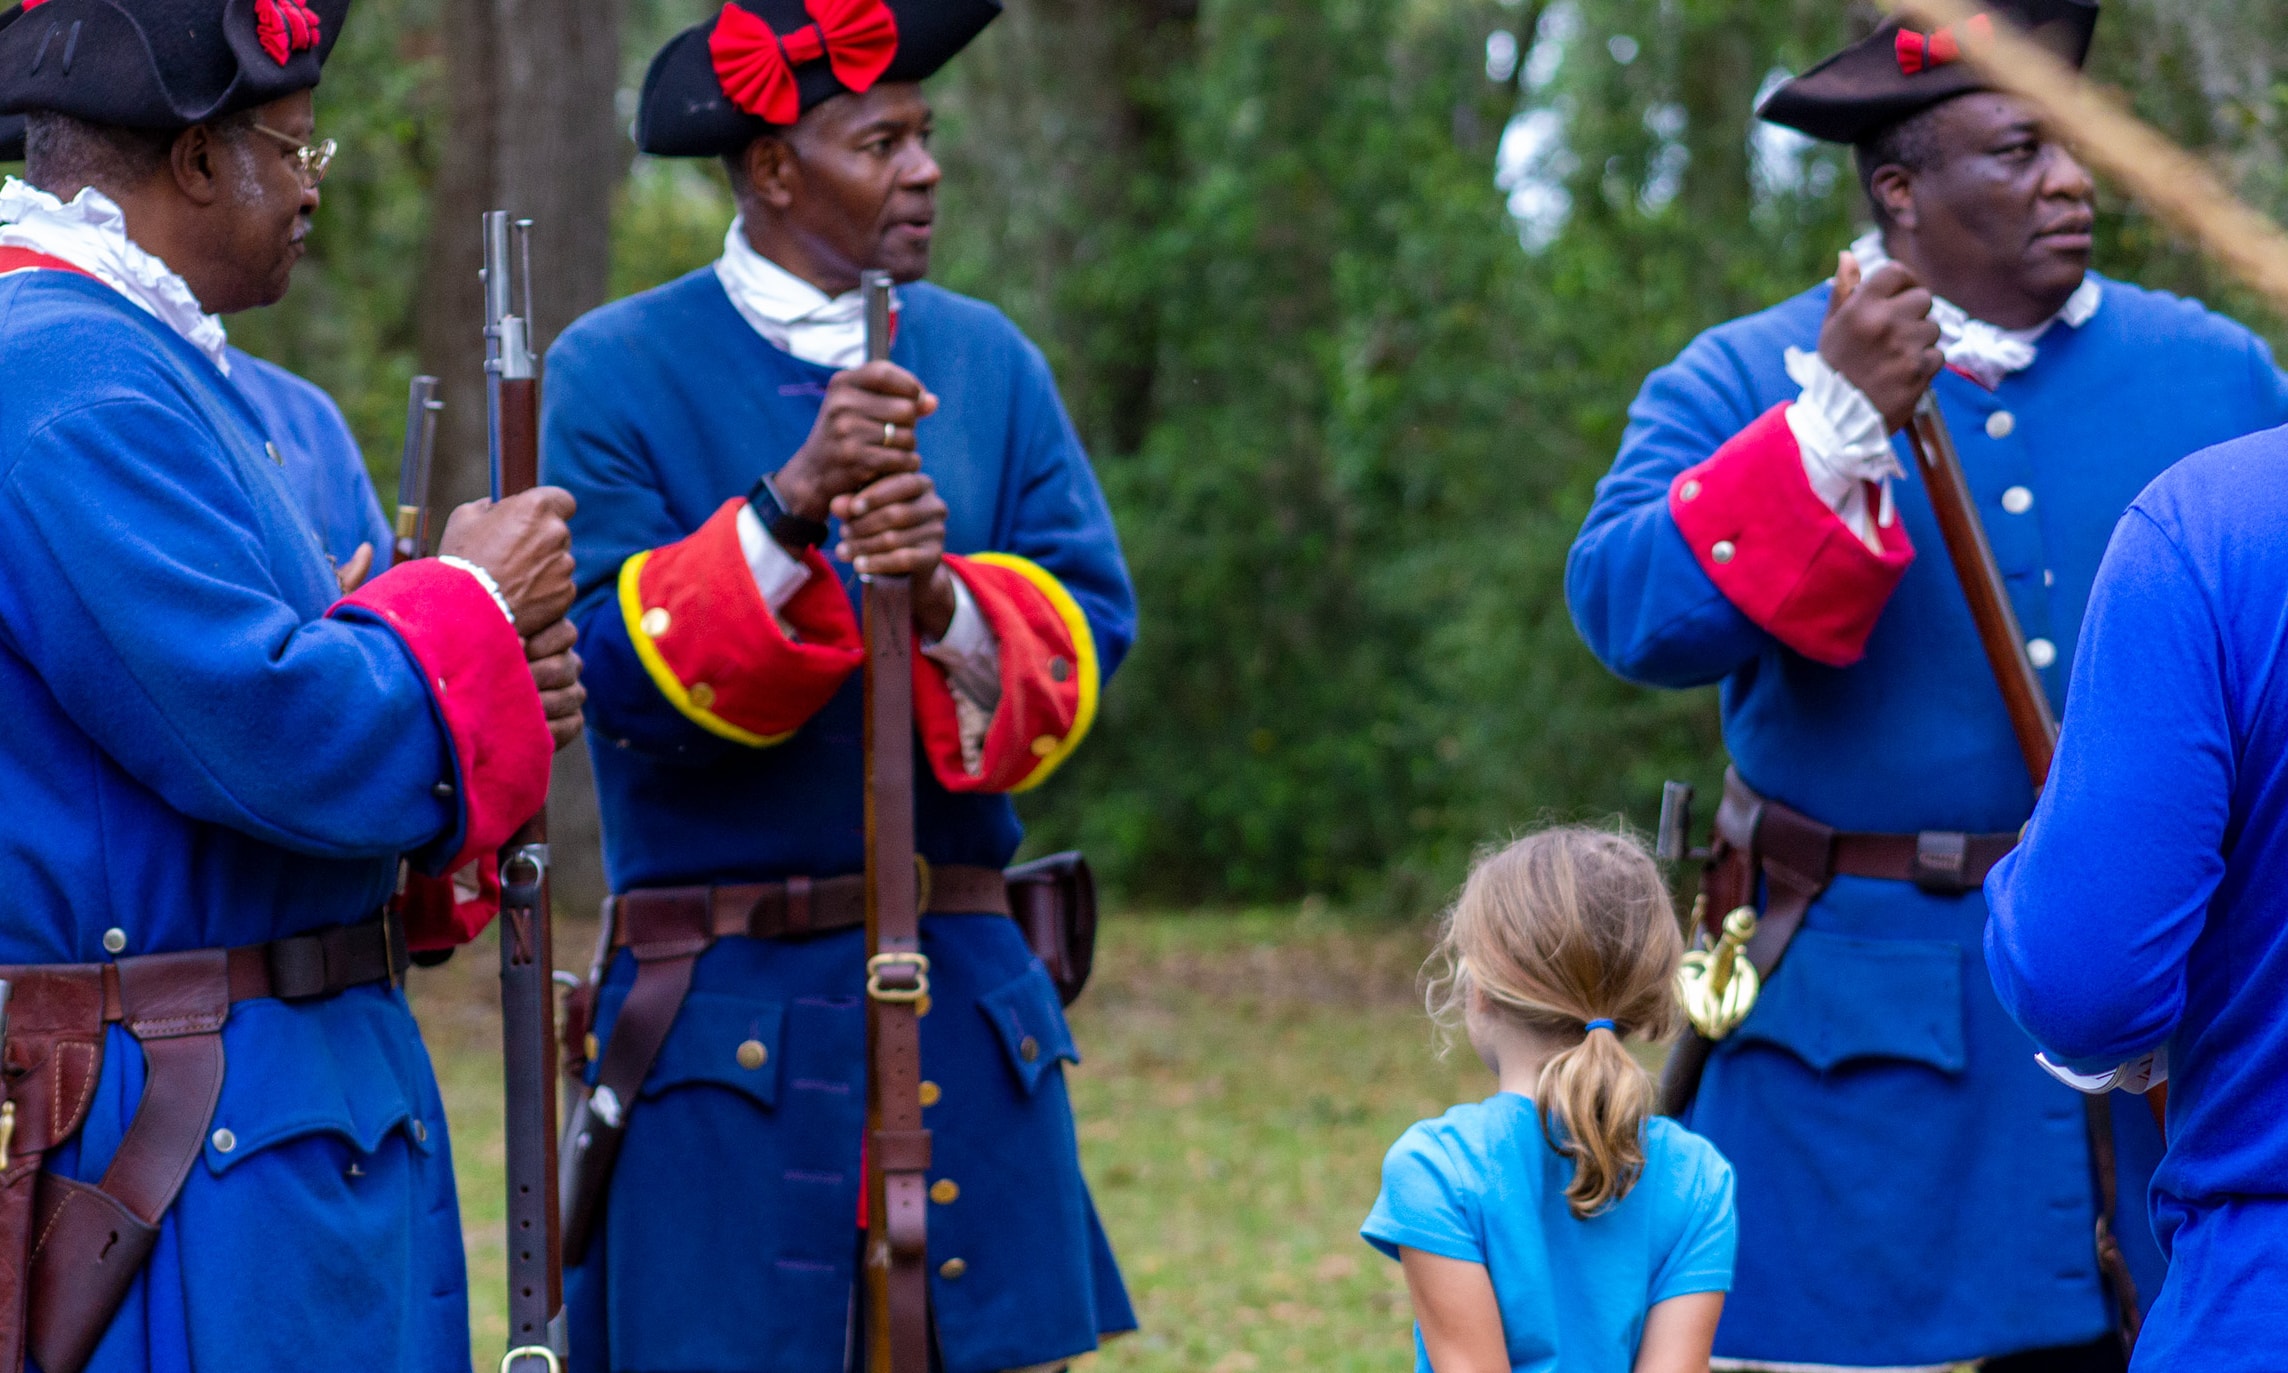 Living history reenacts at Fort Mose in St. Augustine, FL.